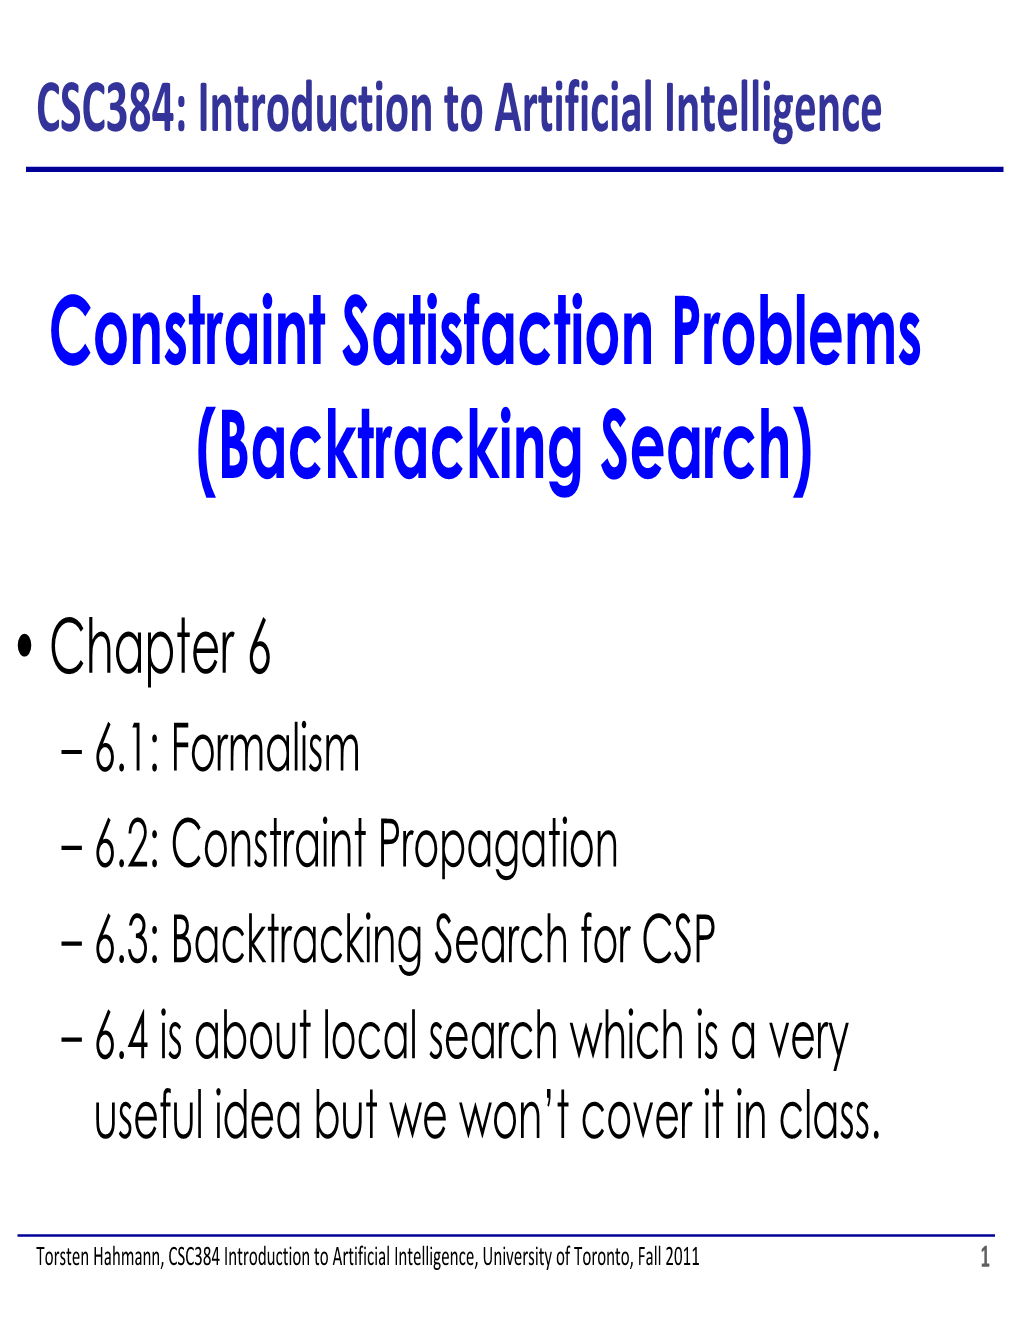 Constraint Satisfaction Problems (Backtracking Search)